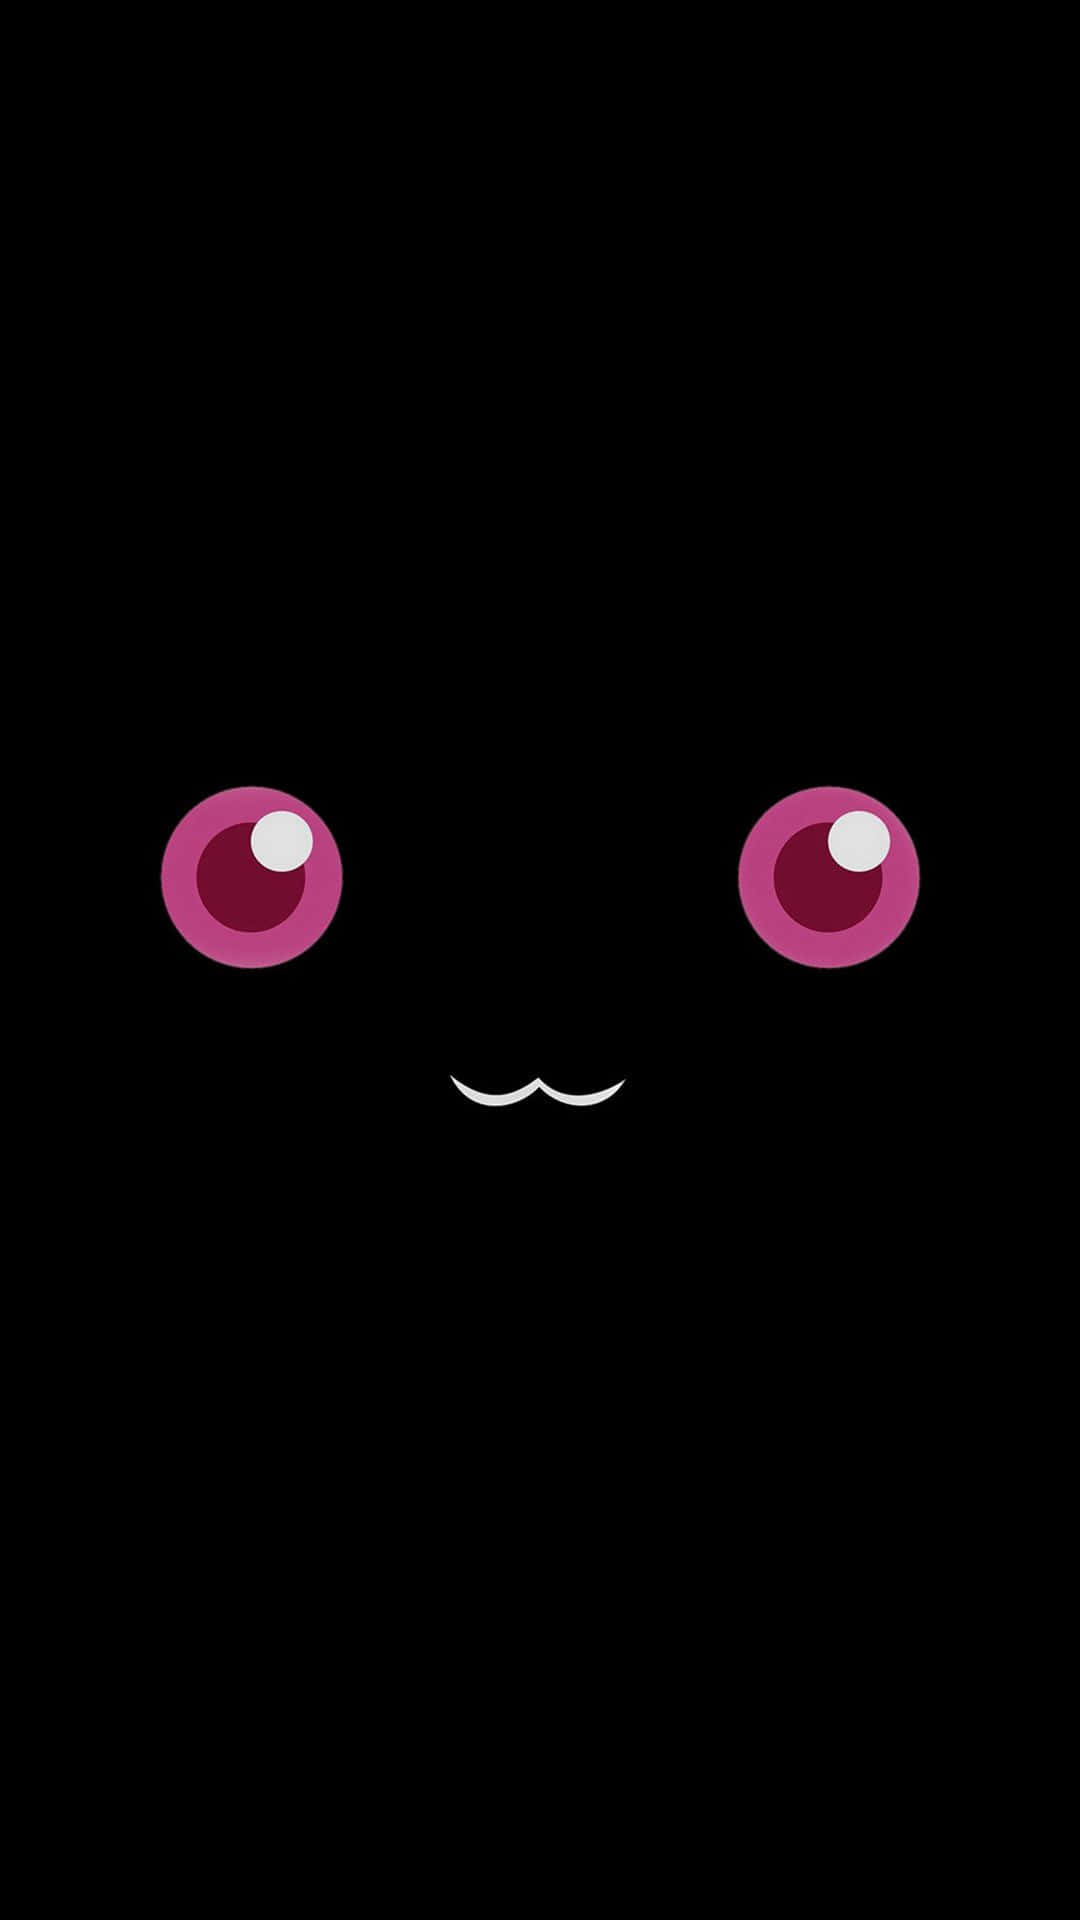 A Black Cat With Pink Eyes On A Black Background Wallpaper